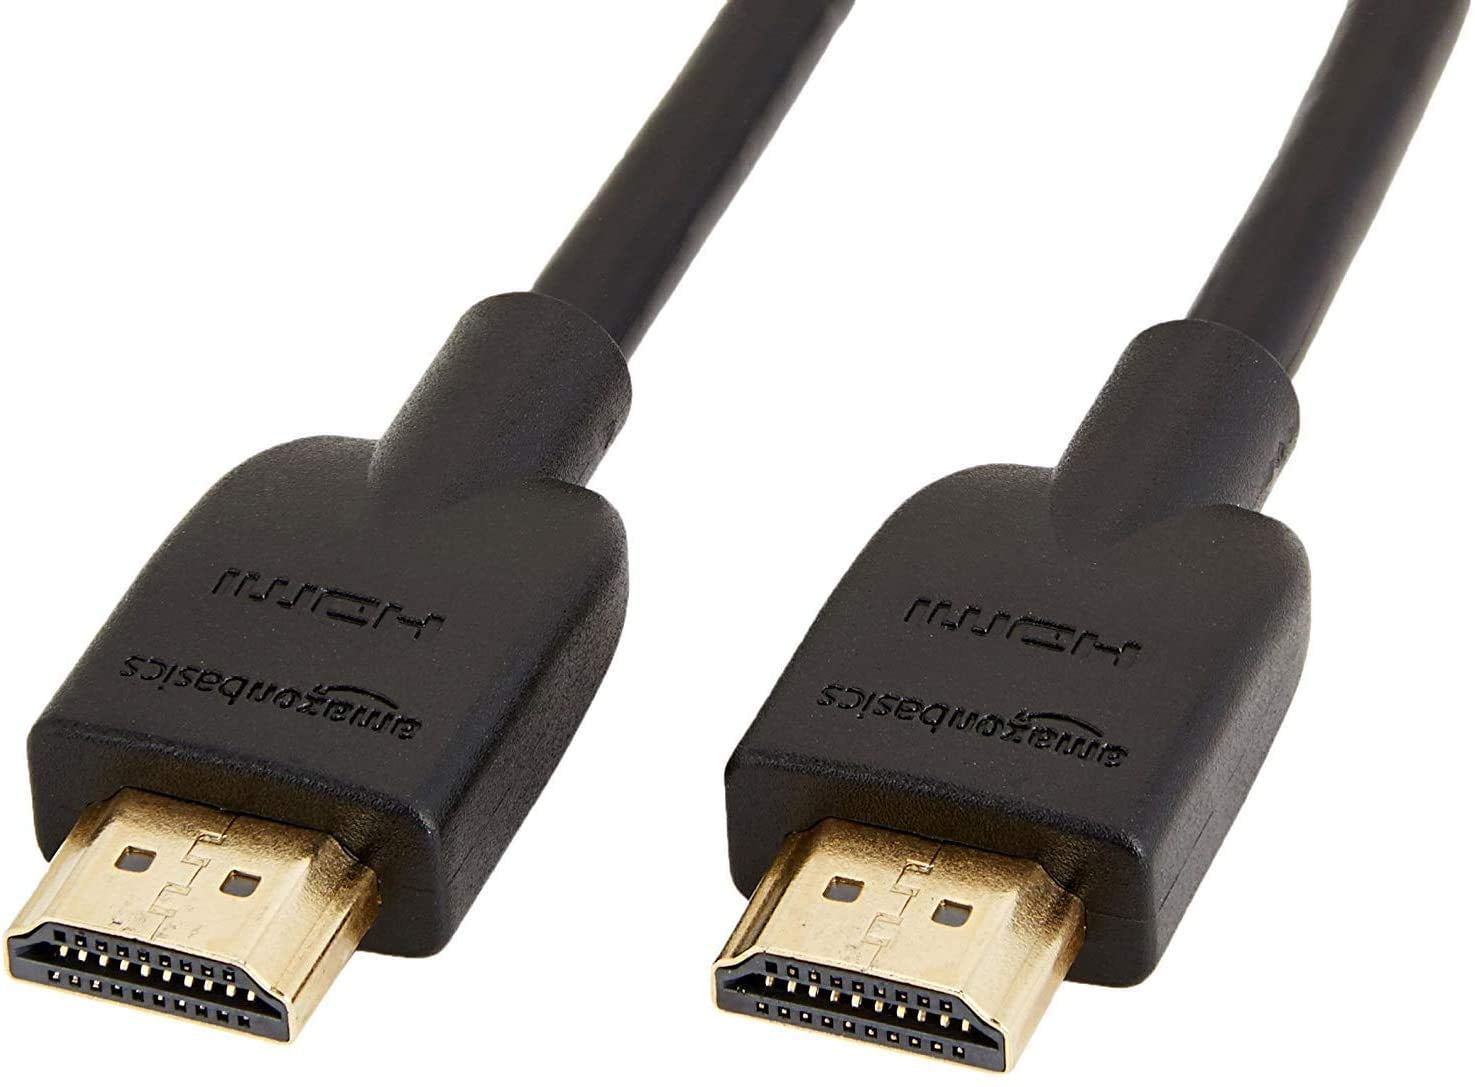 1m - 5m Metre HDMI Cable Fast Speed HD 4K 3D ARC 1080p For PS3 PS4 XBOX SKY  TV